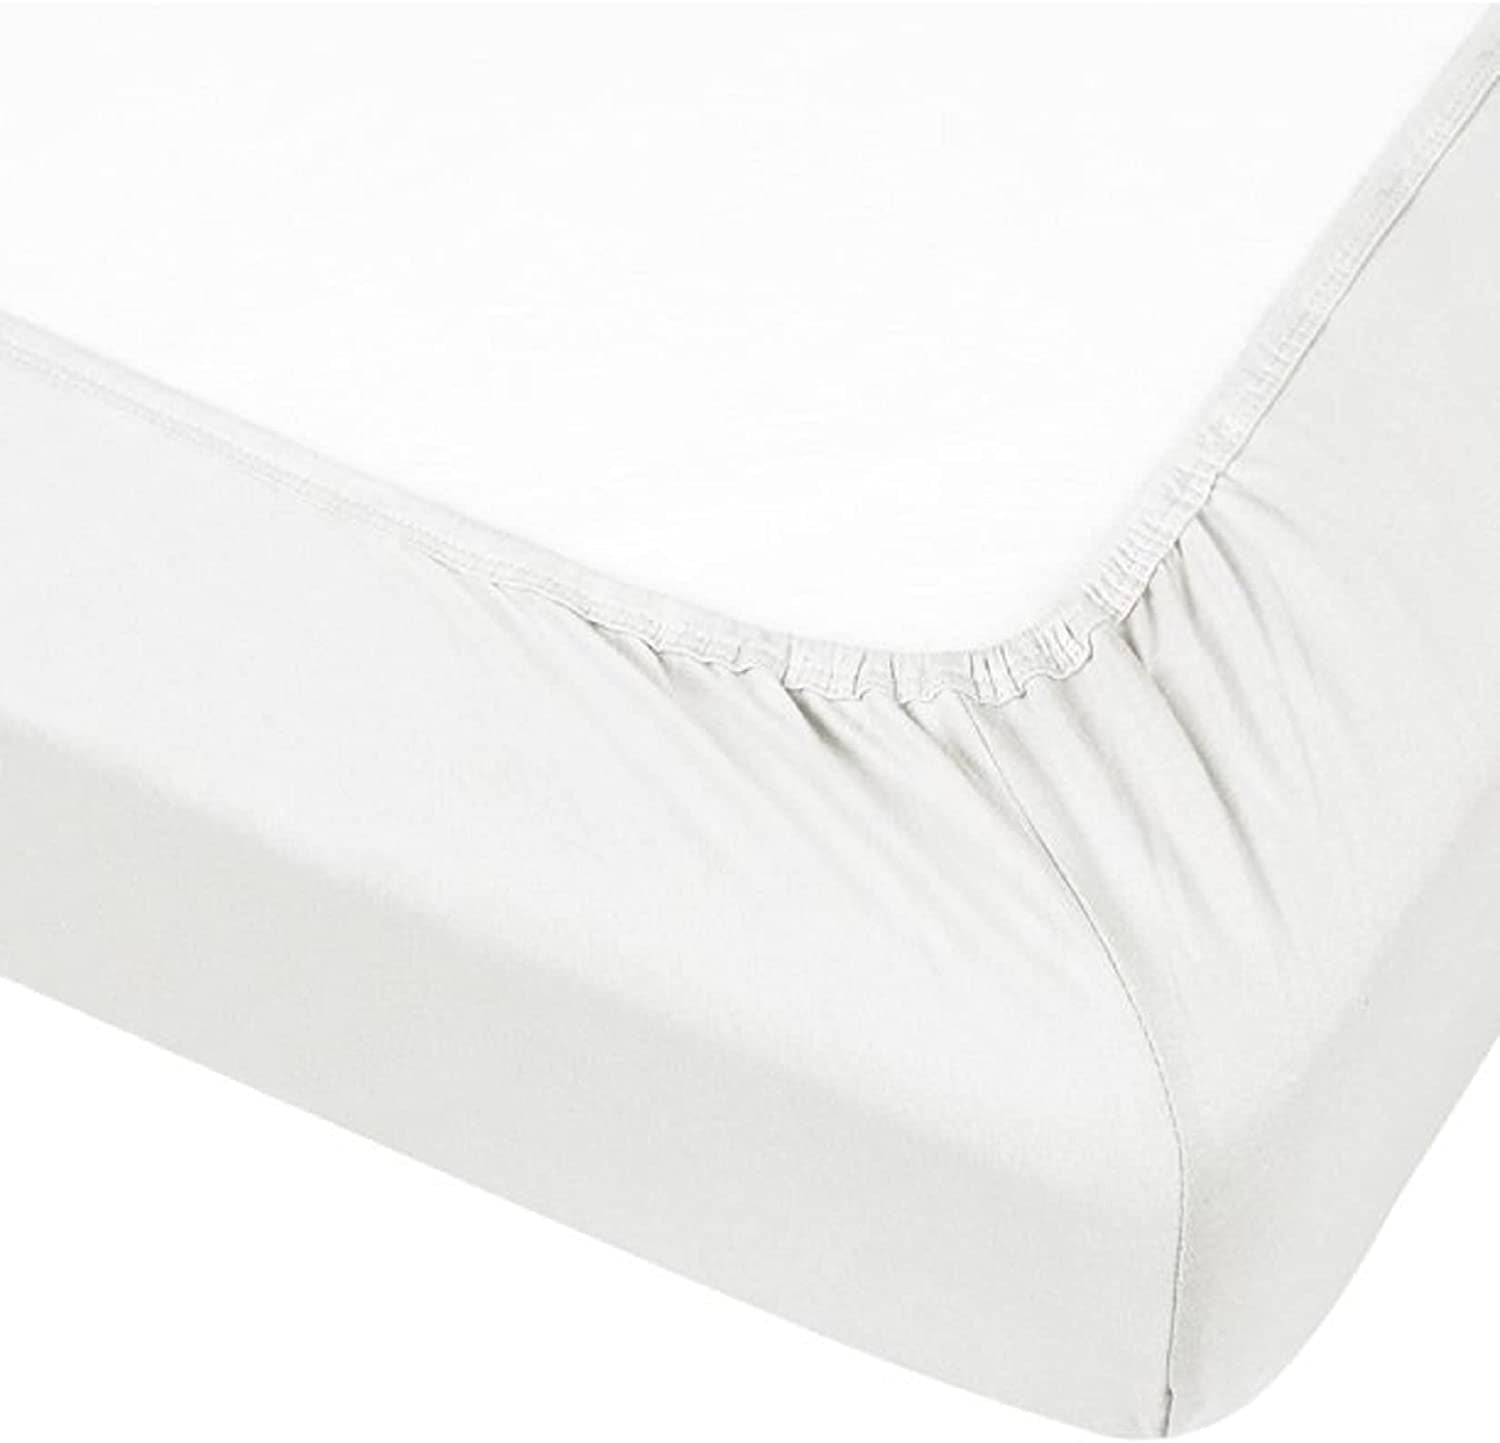 - 2 X Cot Bed Fitted Sheets 100% Cotton Very Soft (70 X 140 Cm)